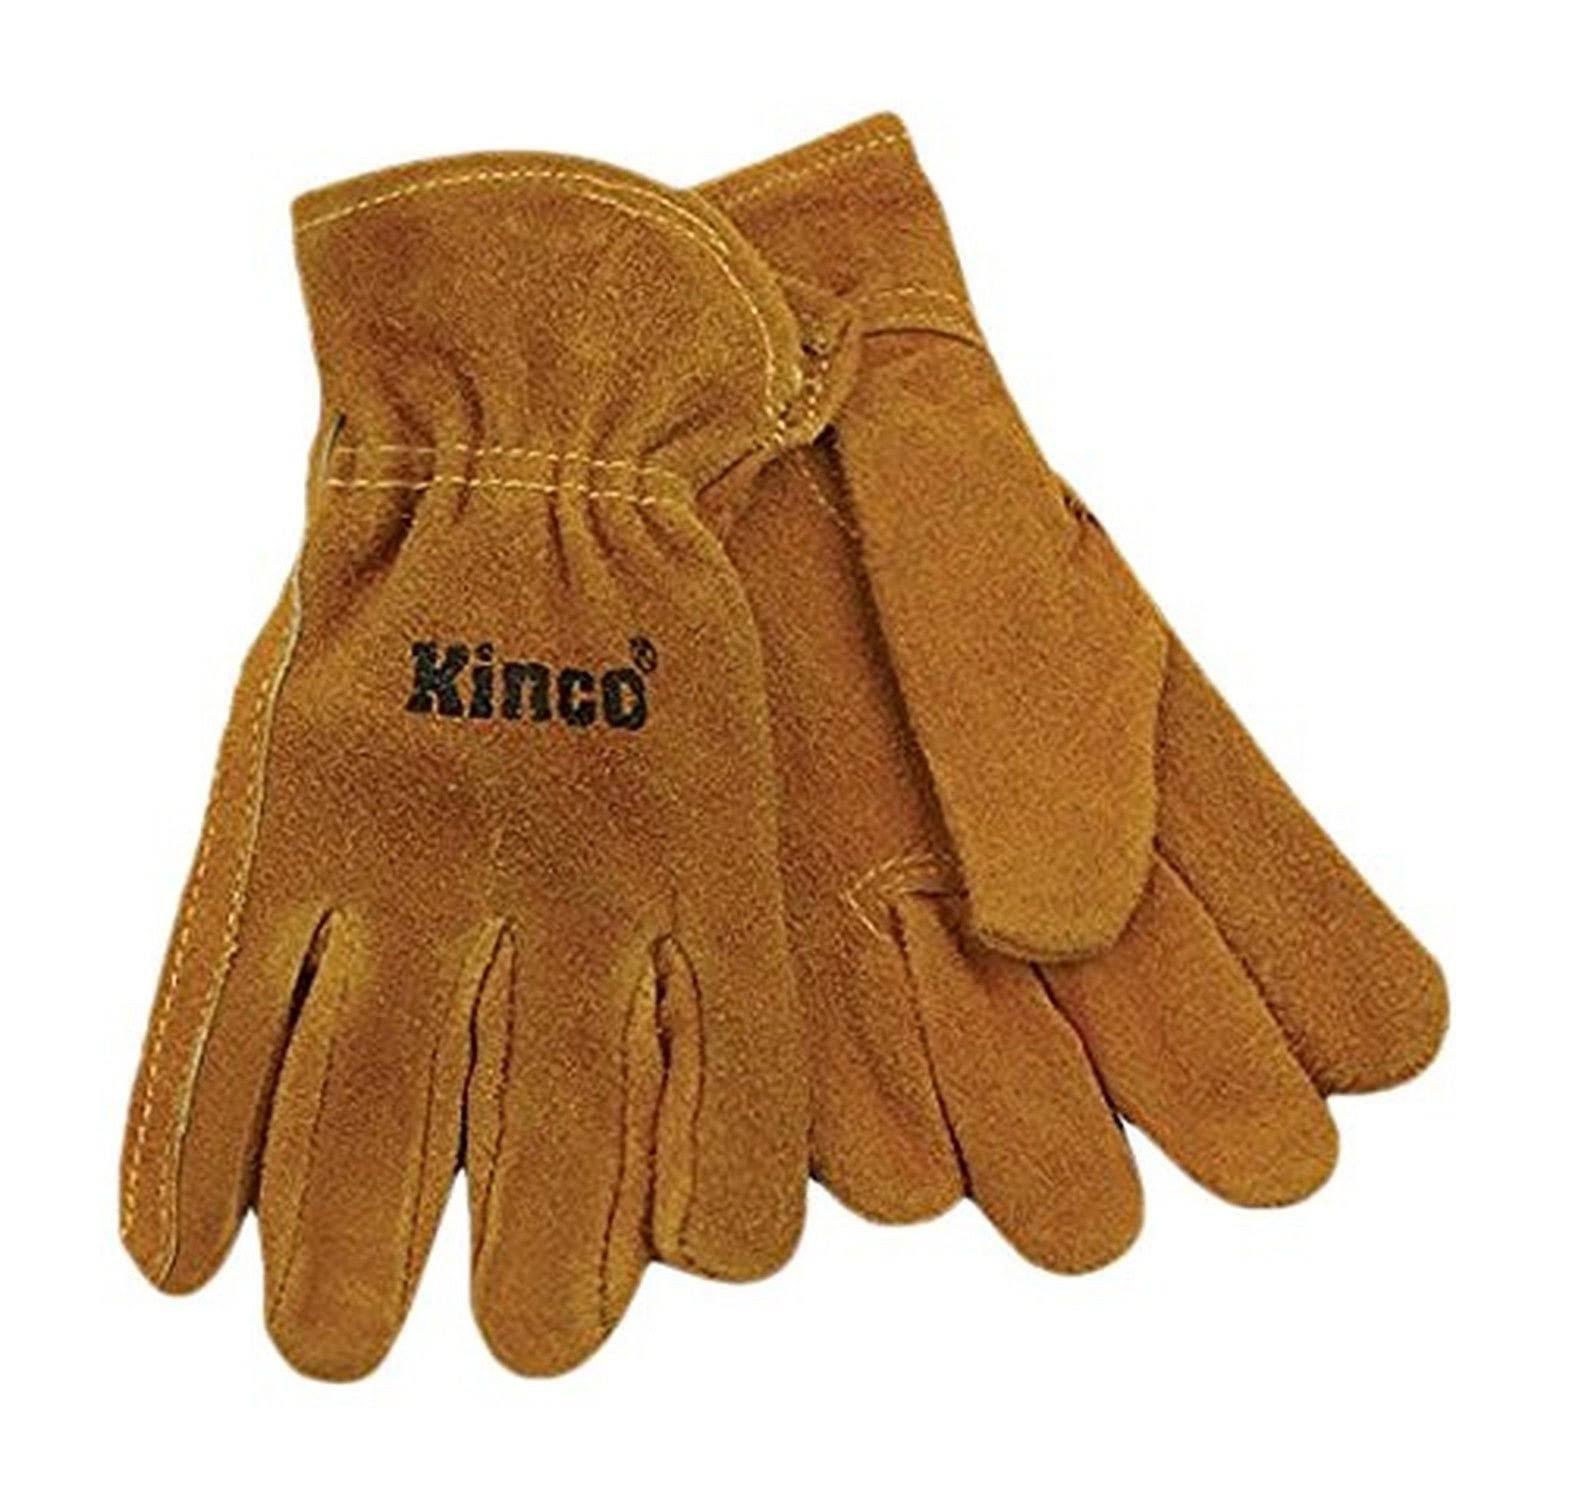 Kinco 50-KS Driver Gloves, Men's, S, Keystone Thumb, Easy-On Cuff, Suede Cowhide Leather, Gold